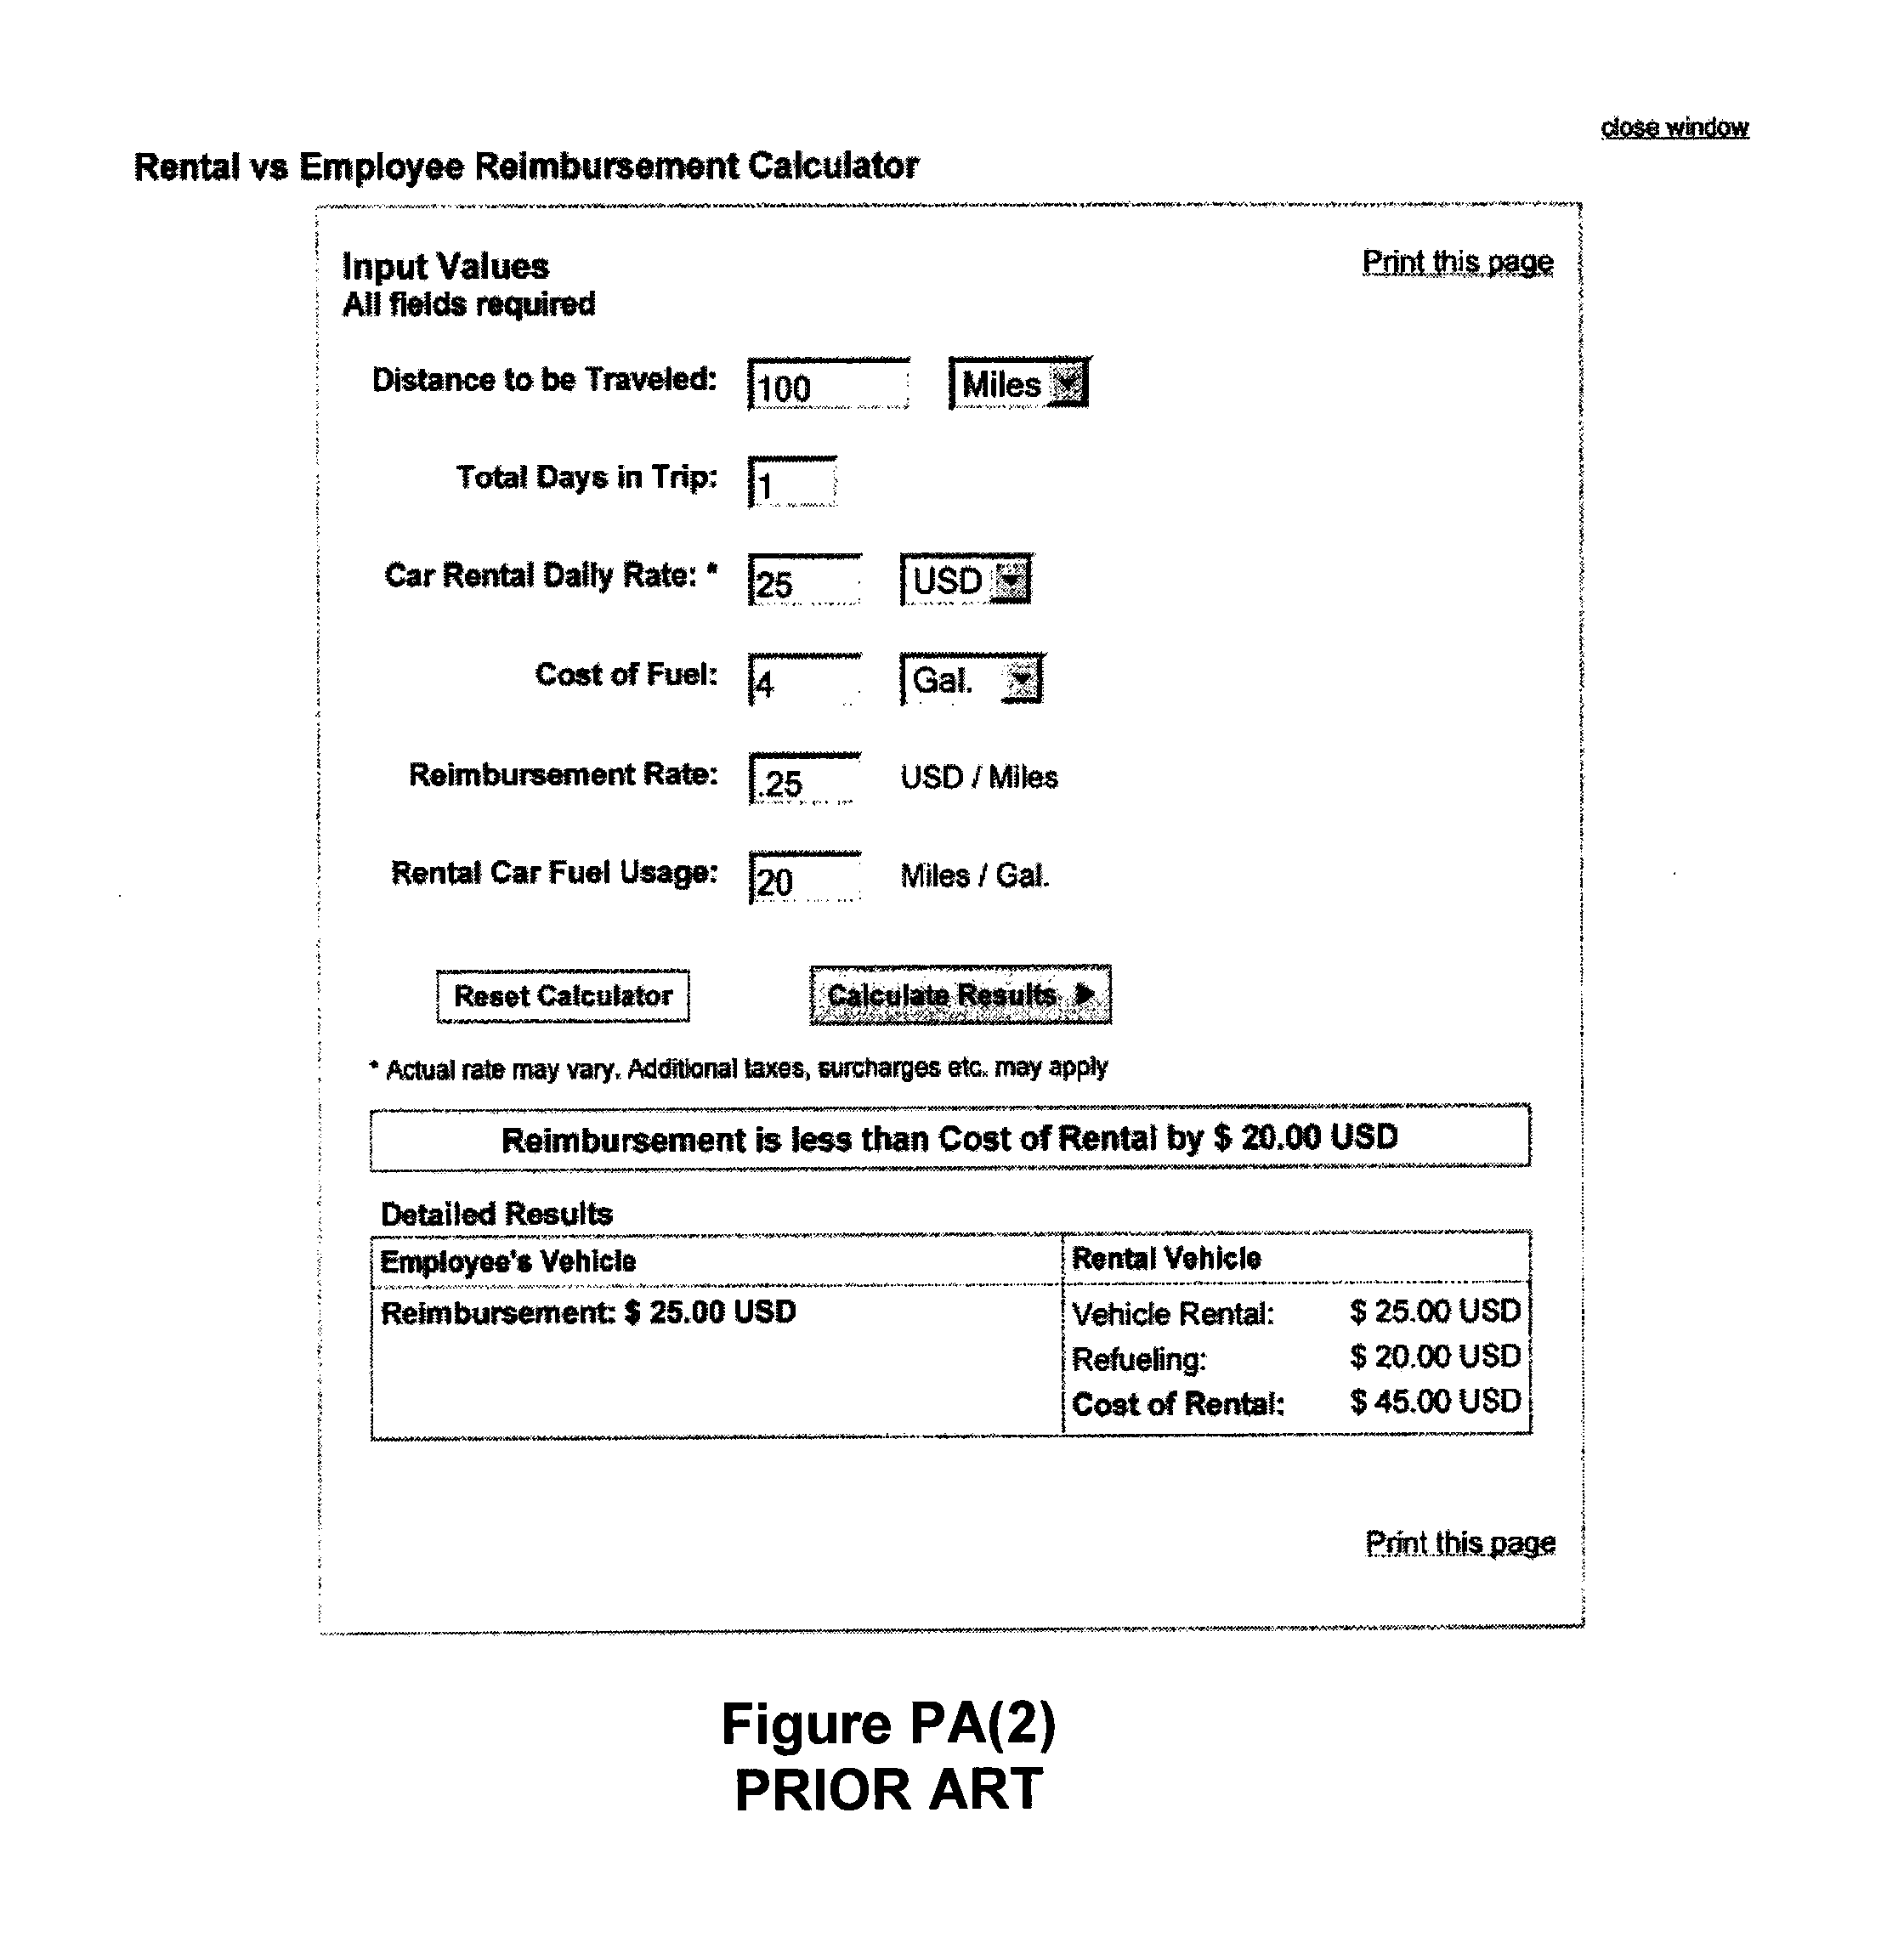 Method and System for Managing Vehicle Travel